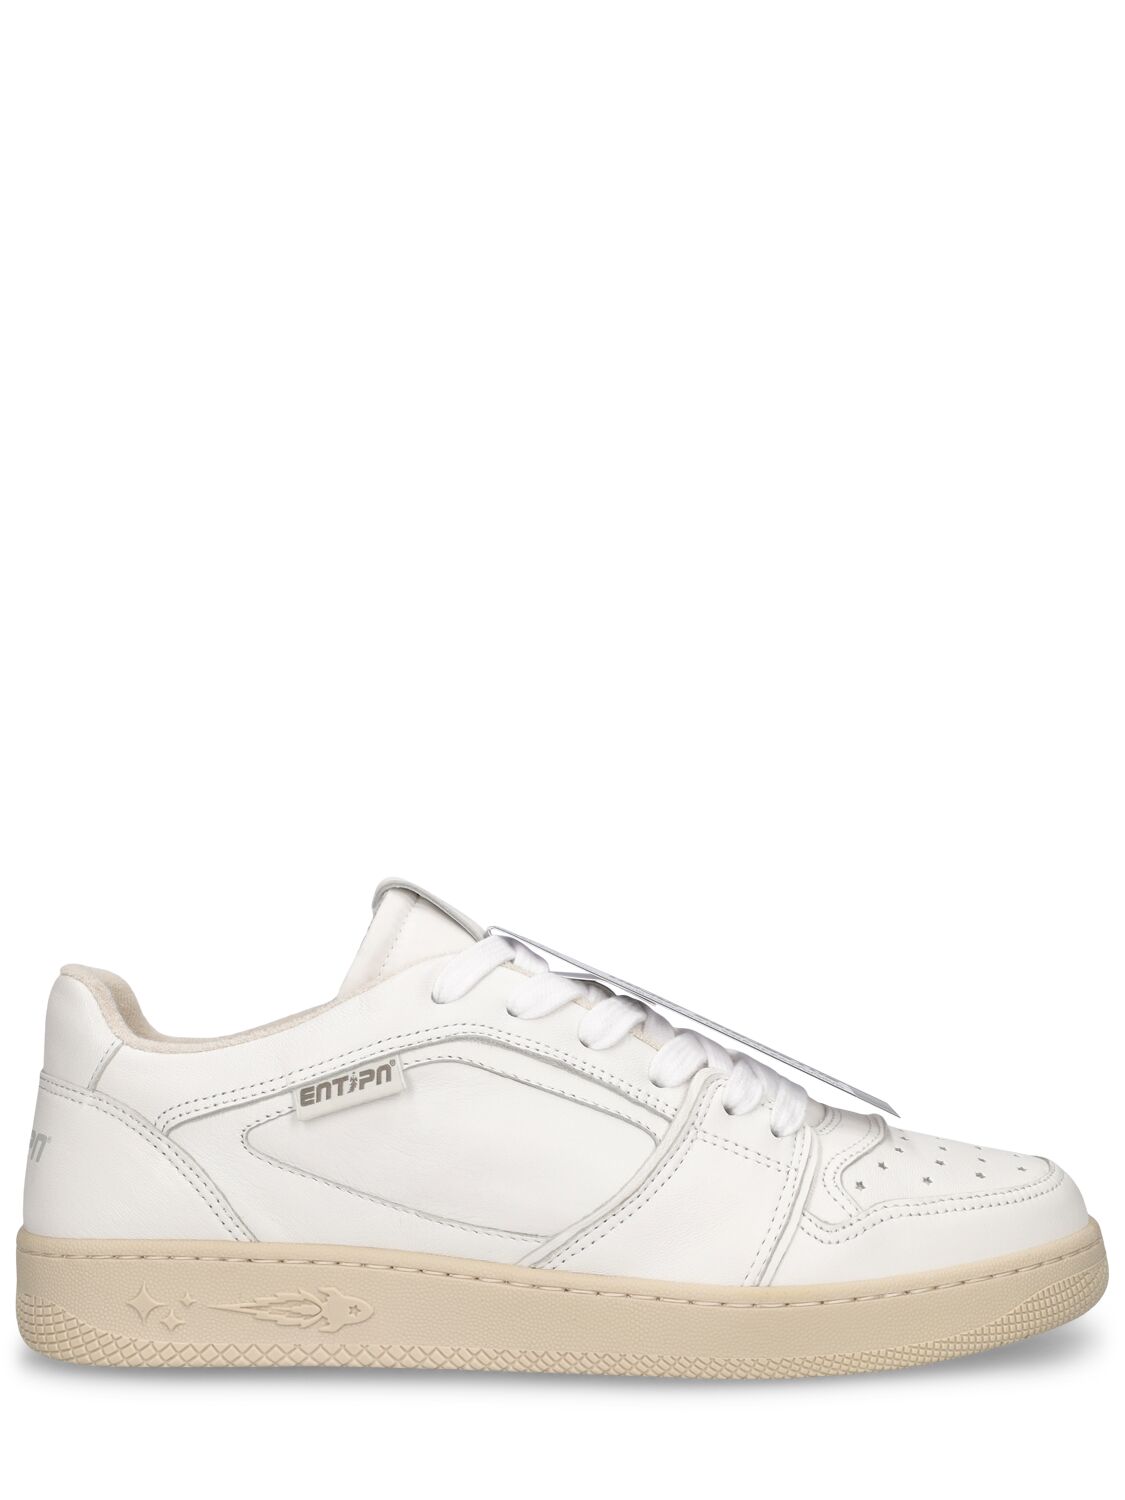 Ej Egg Tag Low Leather Sneakers